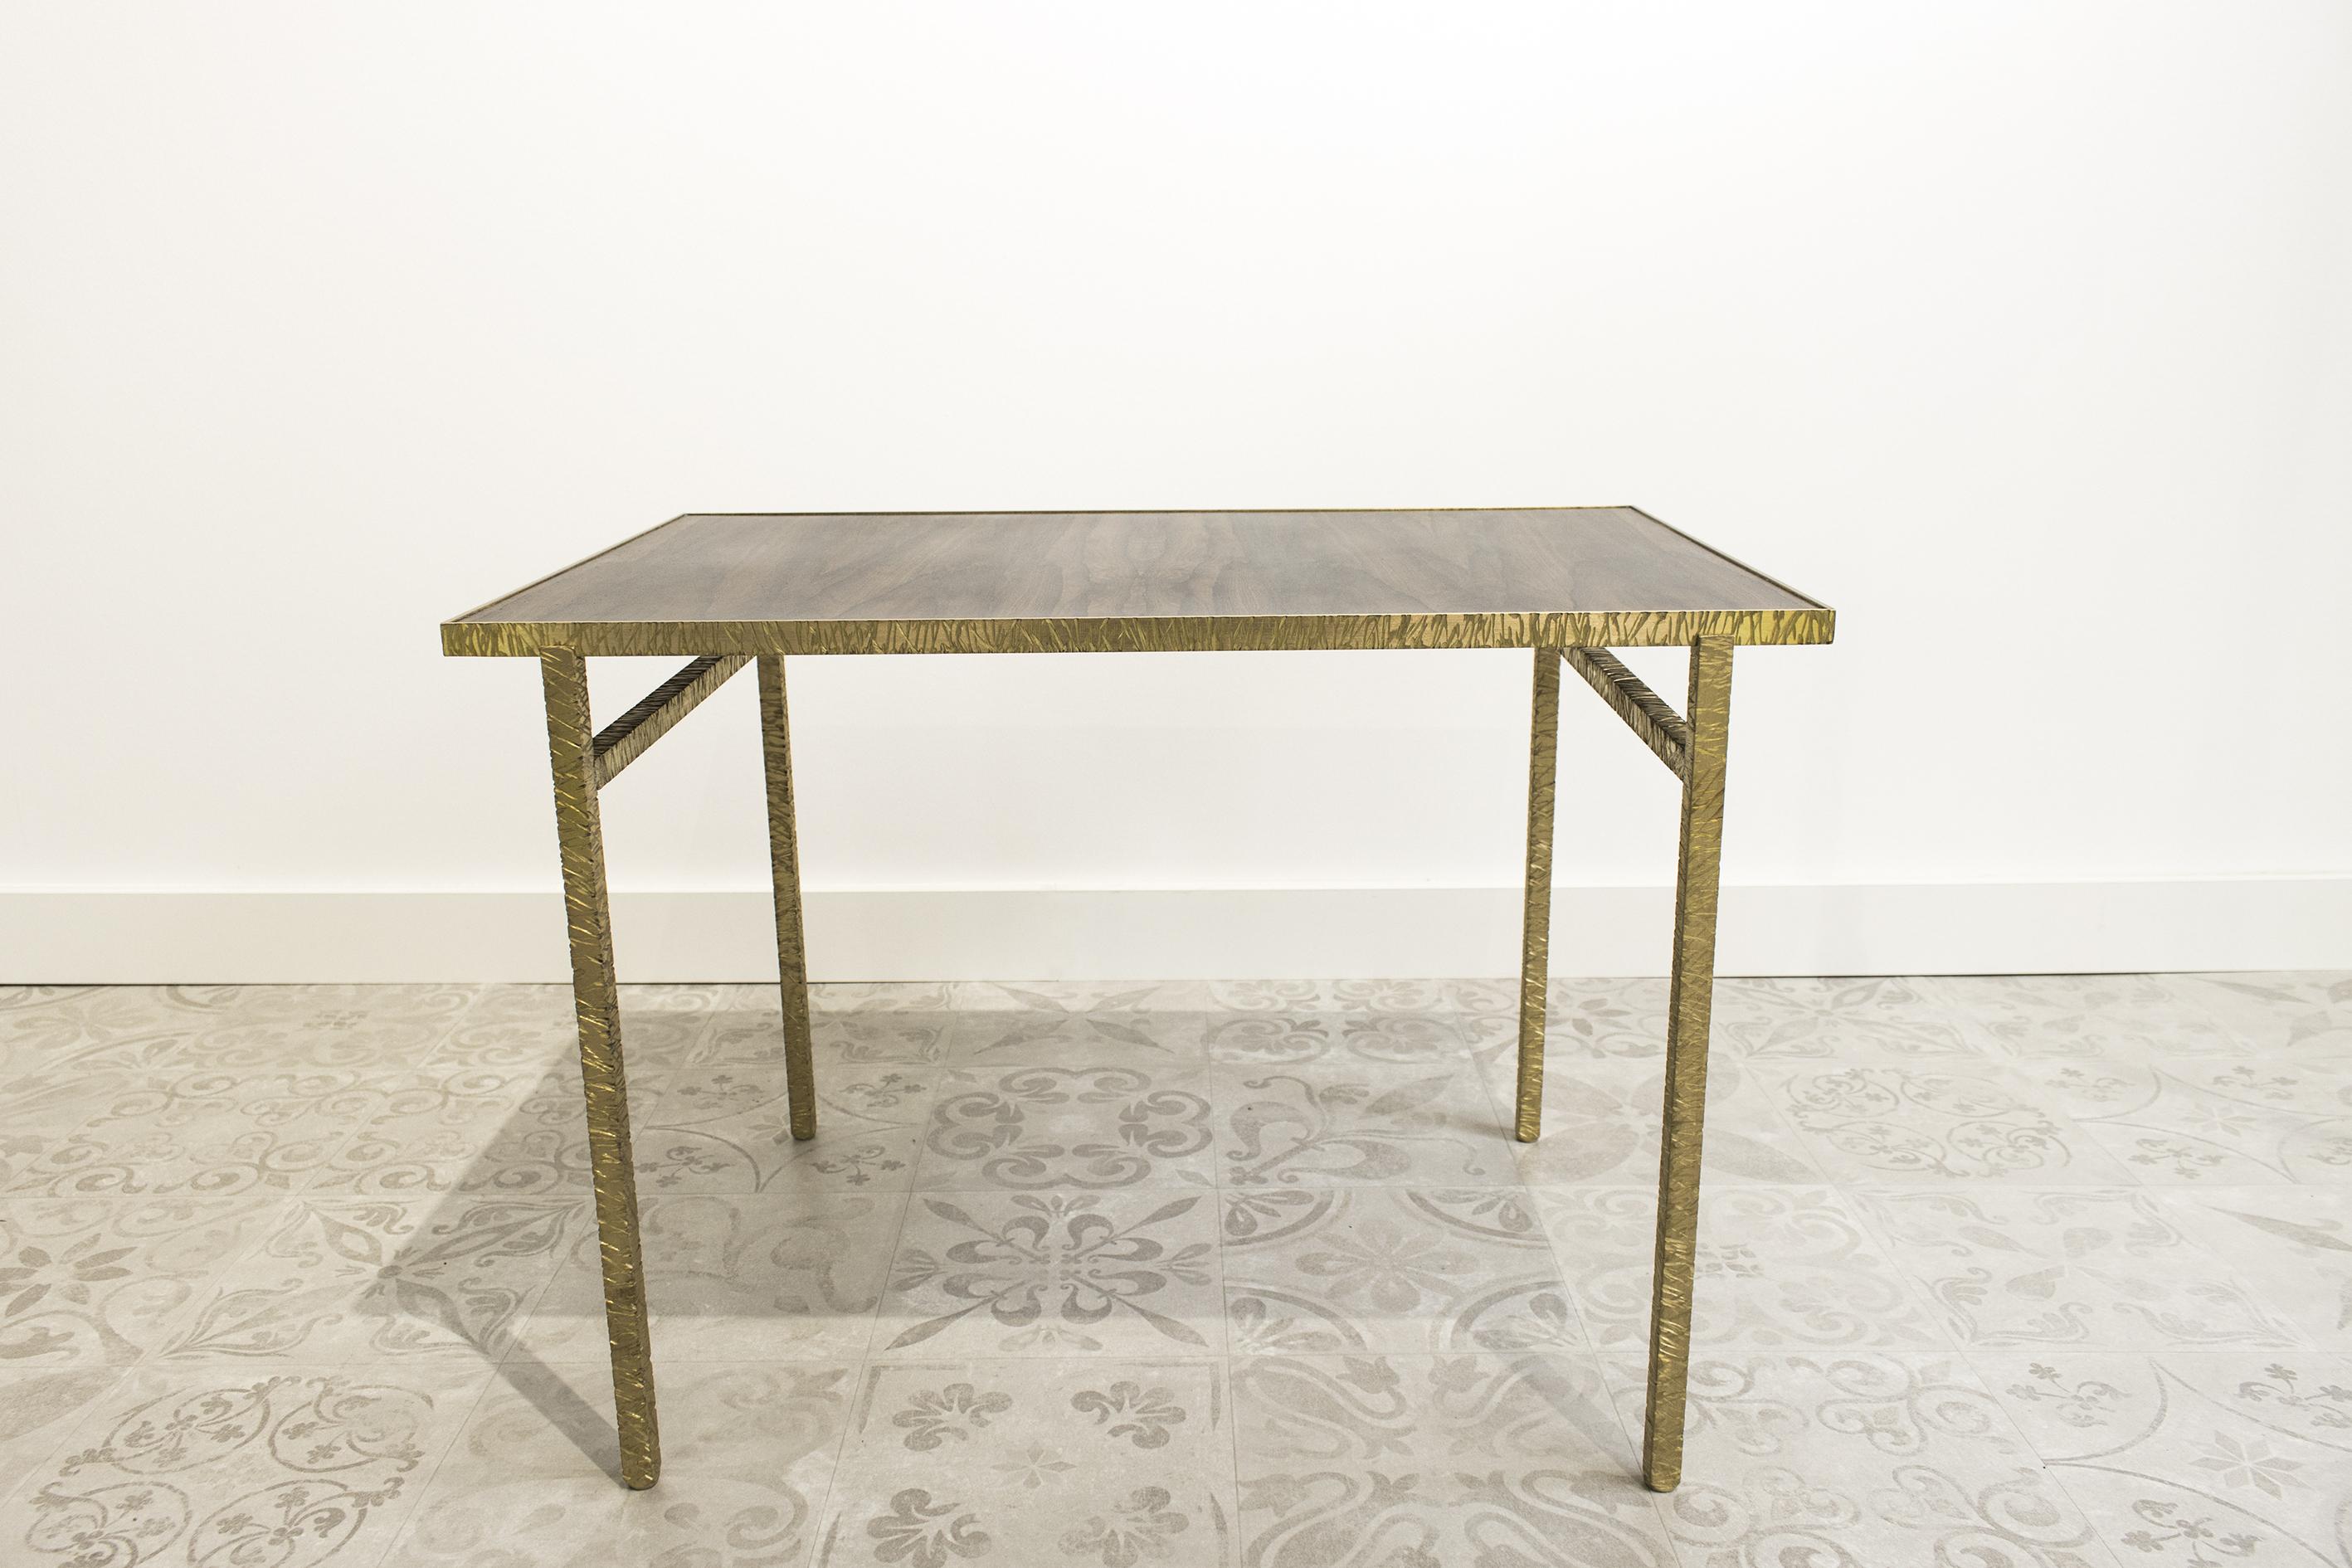 Sleek contemporary French end table designed and created by Barnabé Richard as part of the Hammered collection. The design is decidedly modern with its textured brass structure. Handcrafted in France, the creator has chosen smooth ziricote wood for